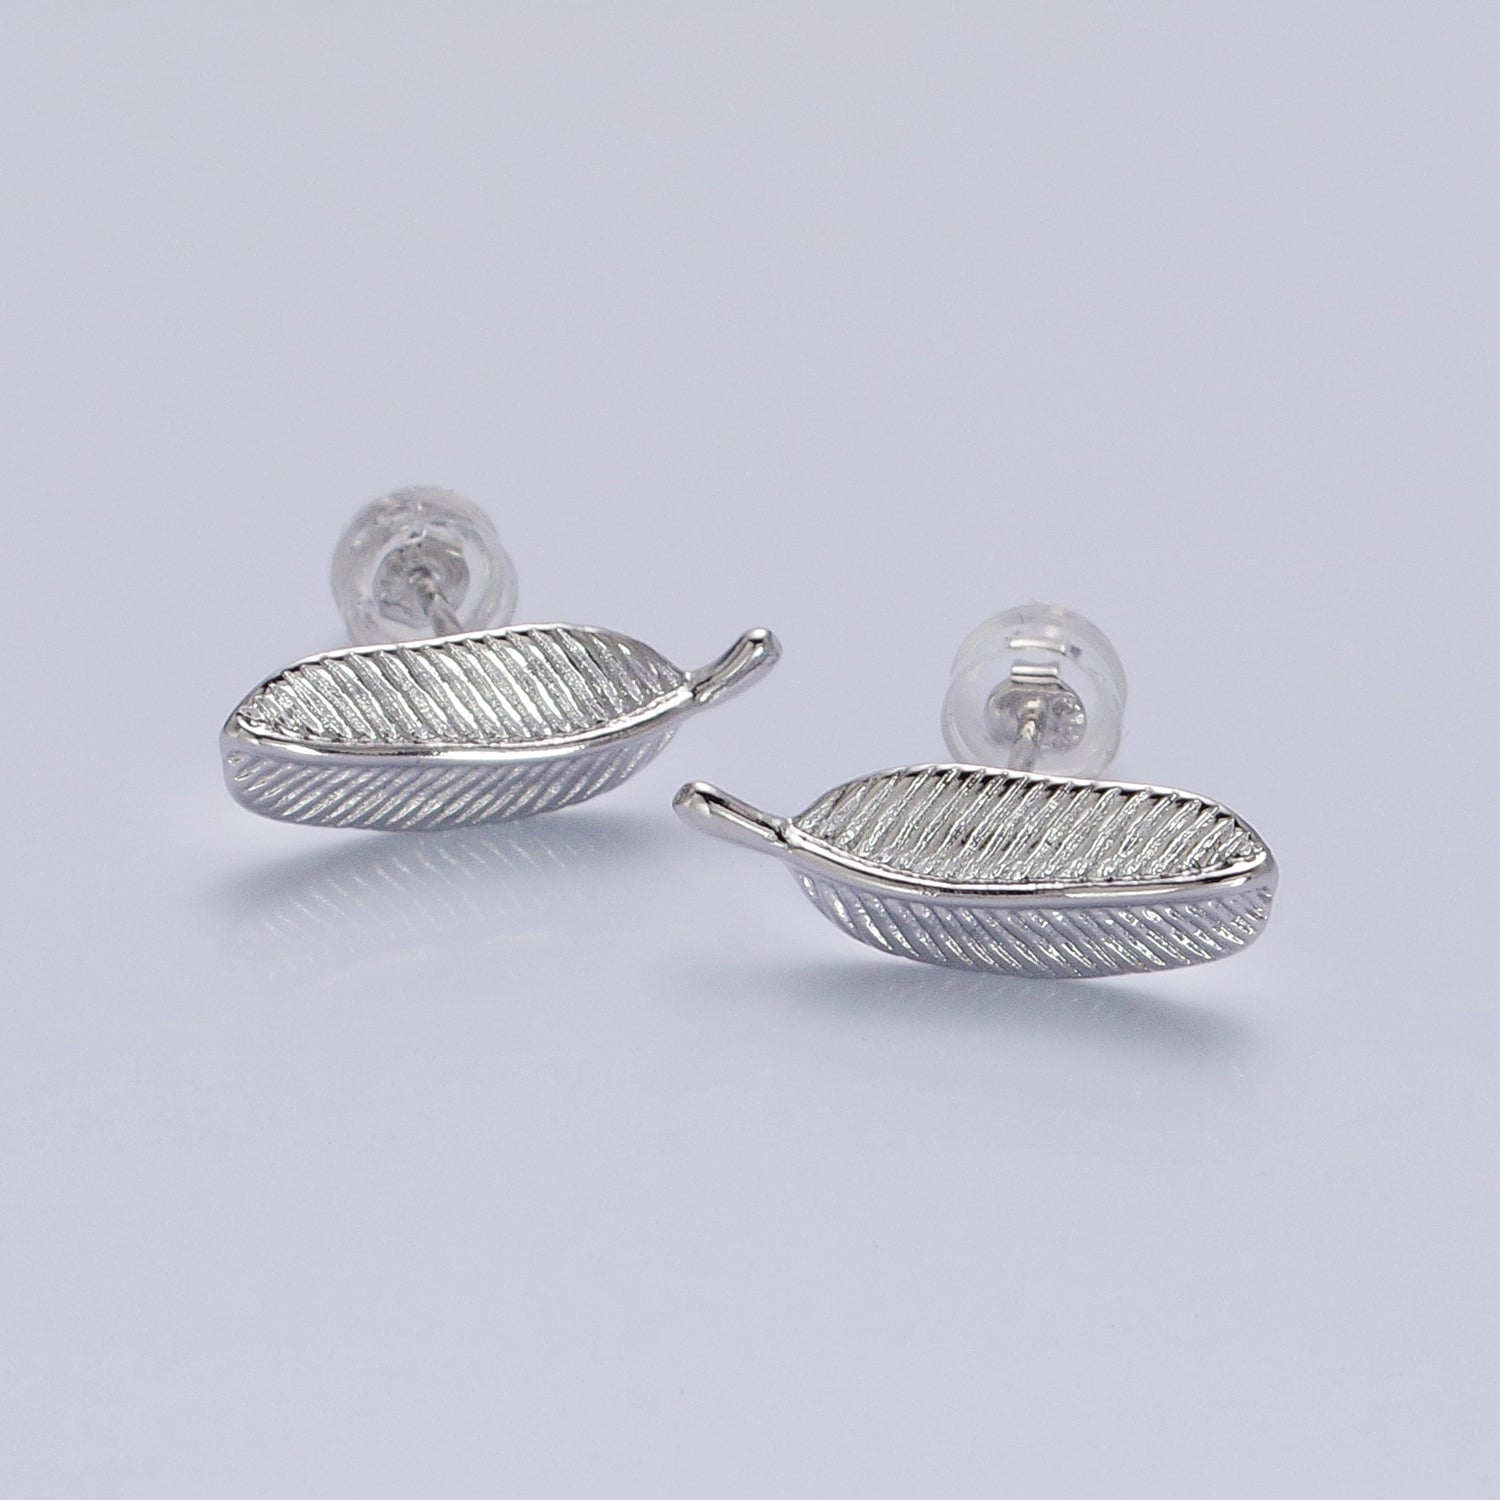 Silver, Gold Line-Textured Natural Plant Leaf Stud Earrings | AB813 AB835